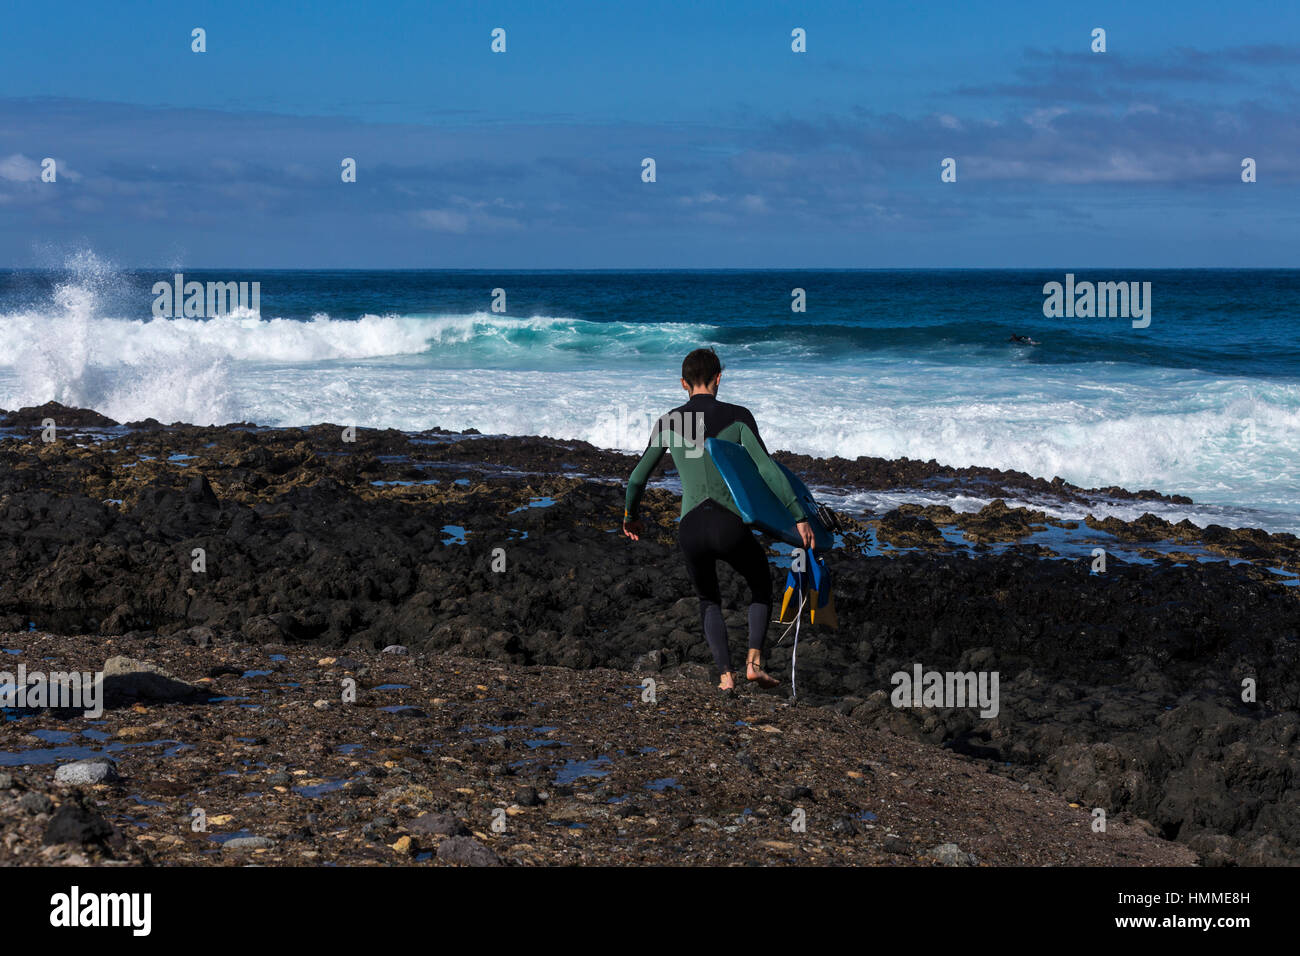 Bodyboarder crossing the rocks to enter the water at Punta Blanca in high waves on the west coast of Tenerife, Canary Islands, Spain Stock Photo